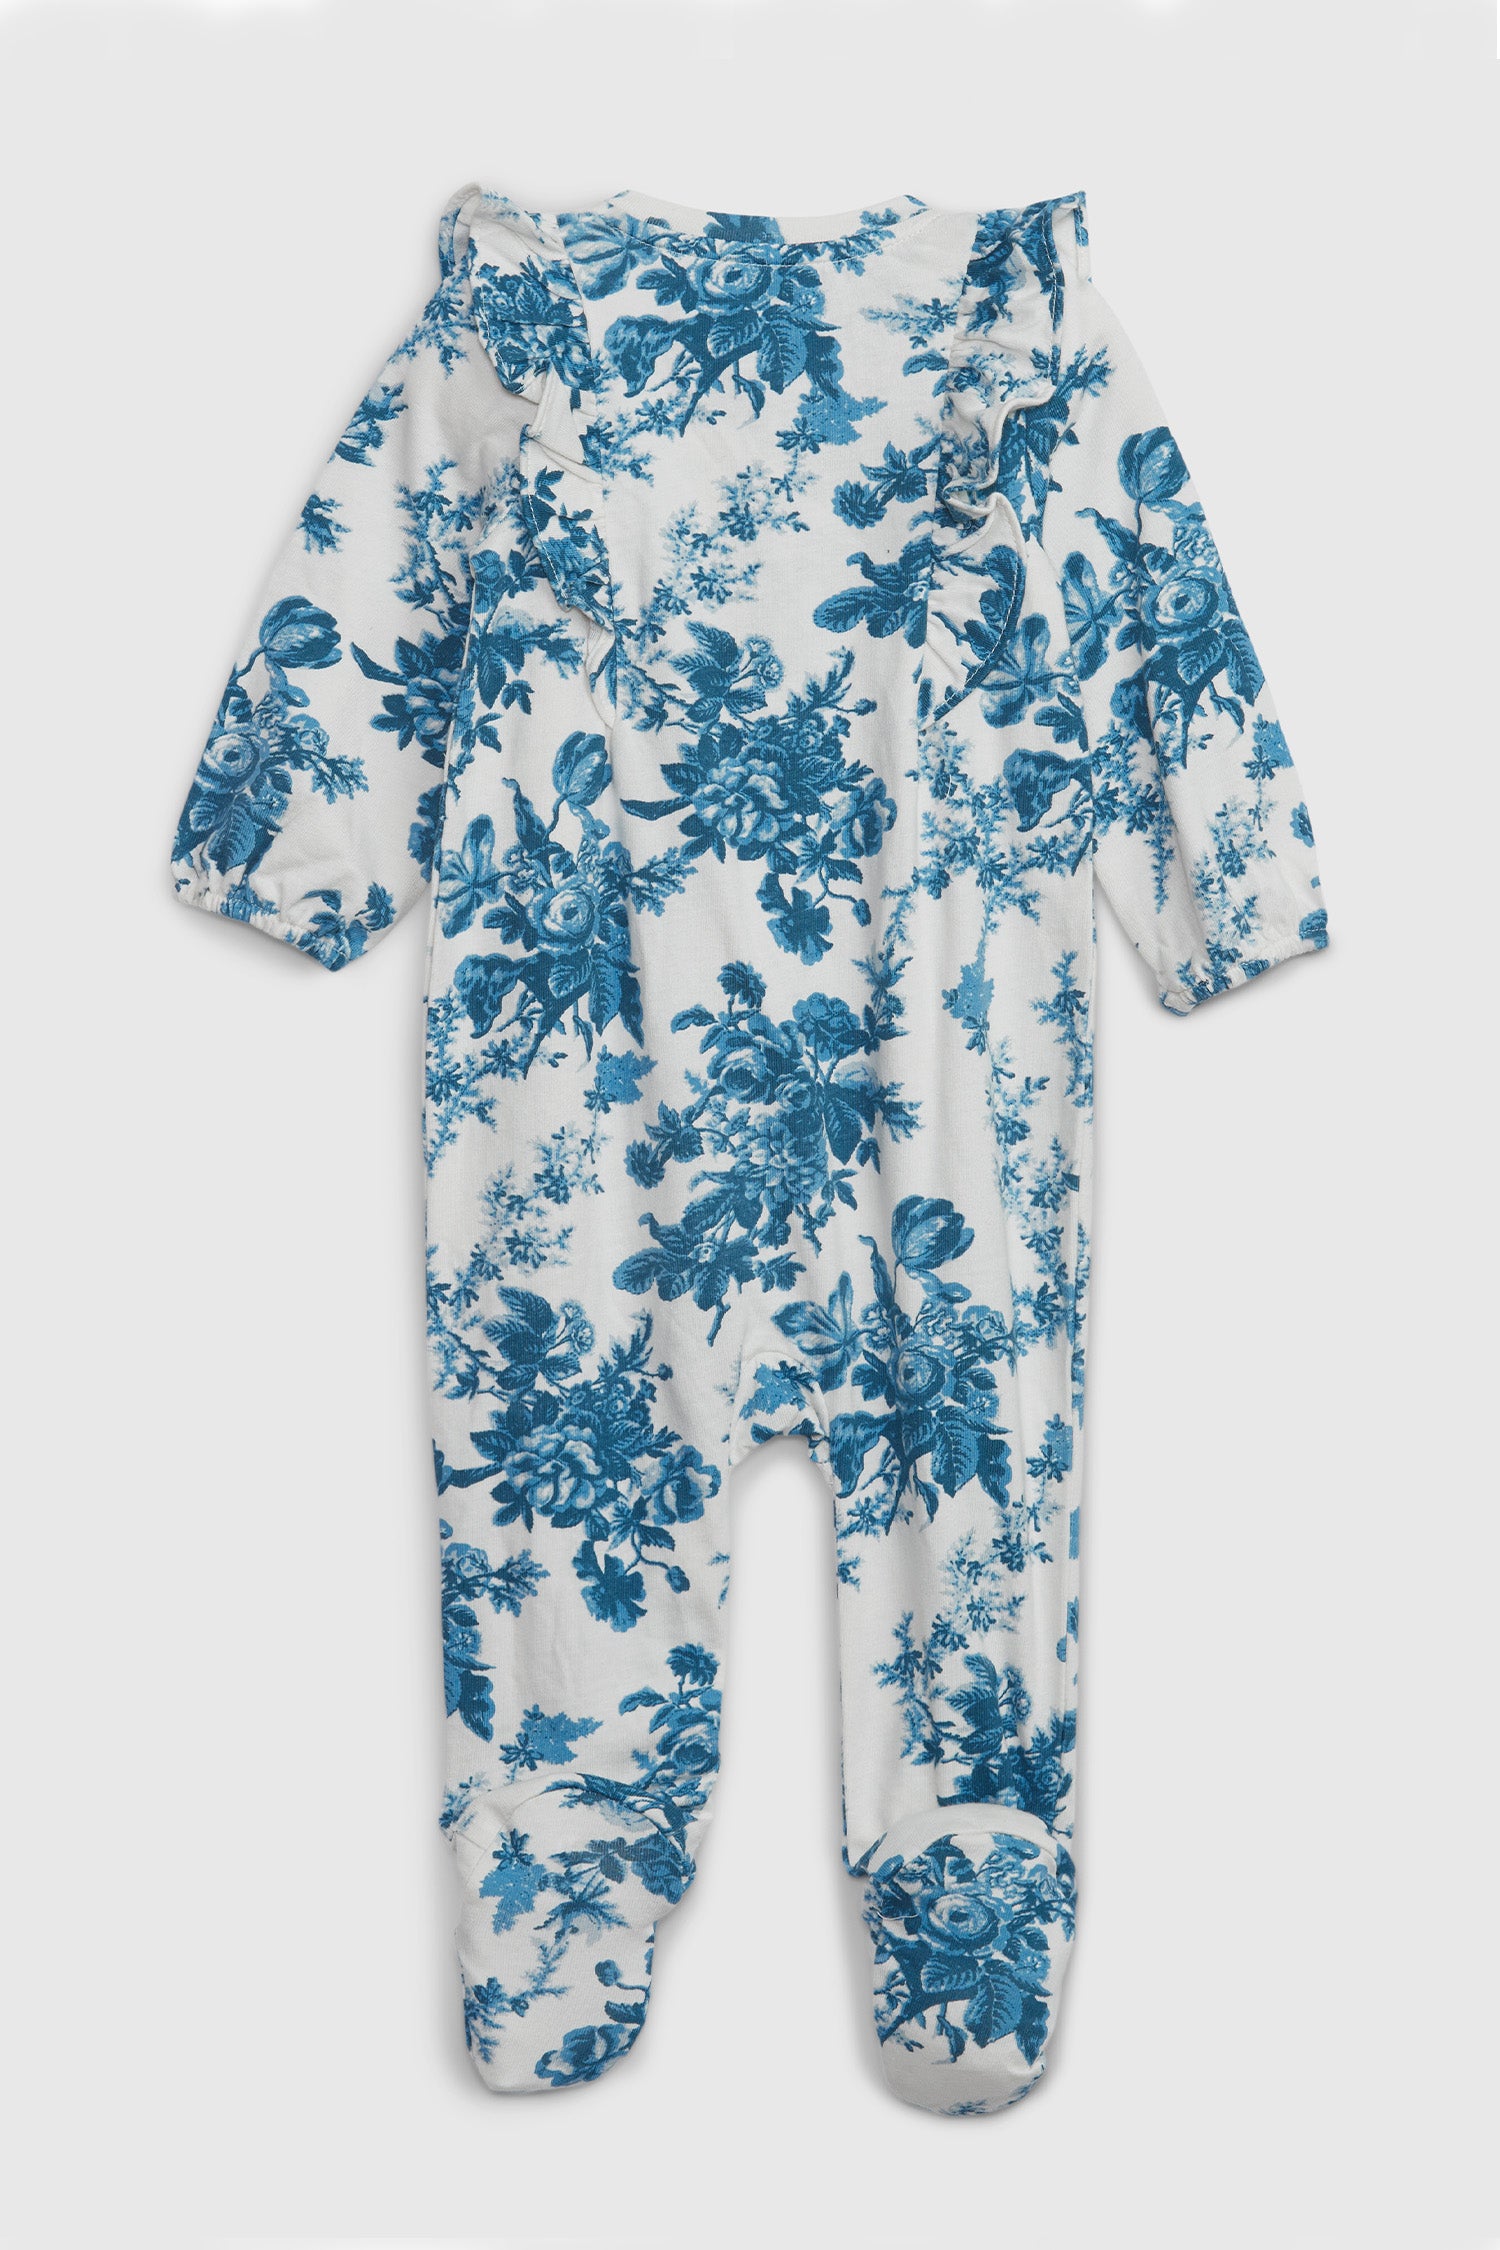 Image showing back of Baby's blue floral onesie